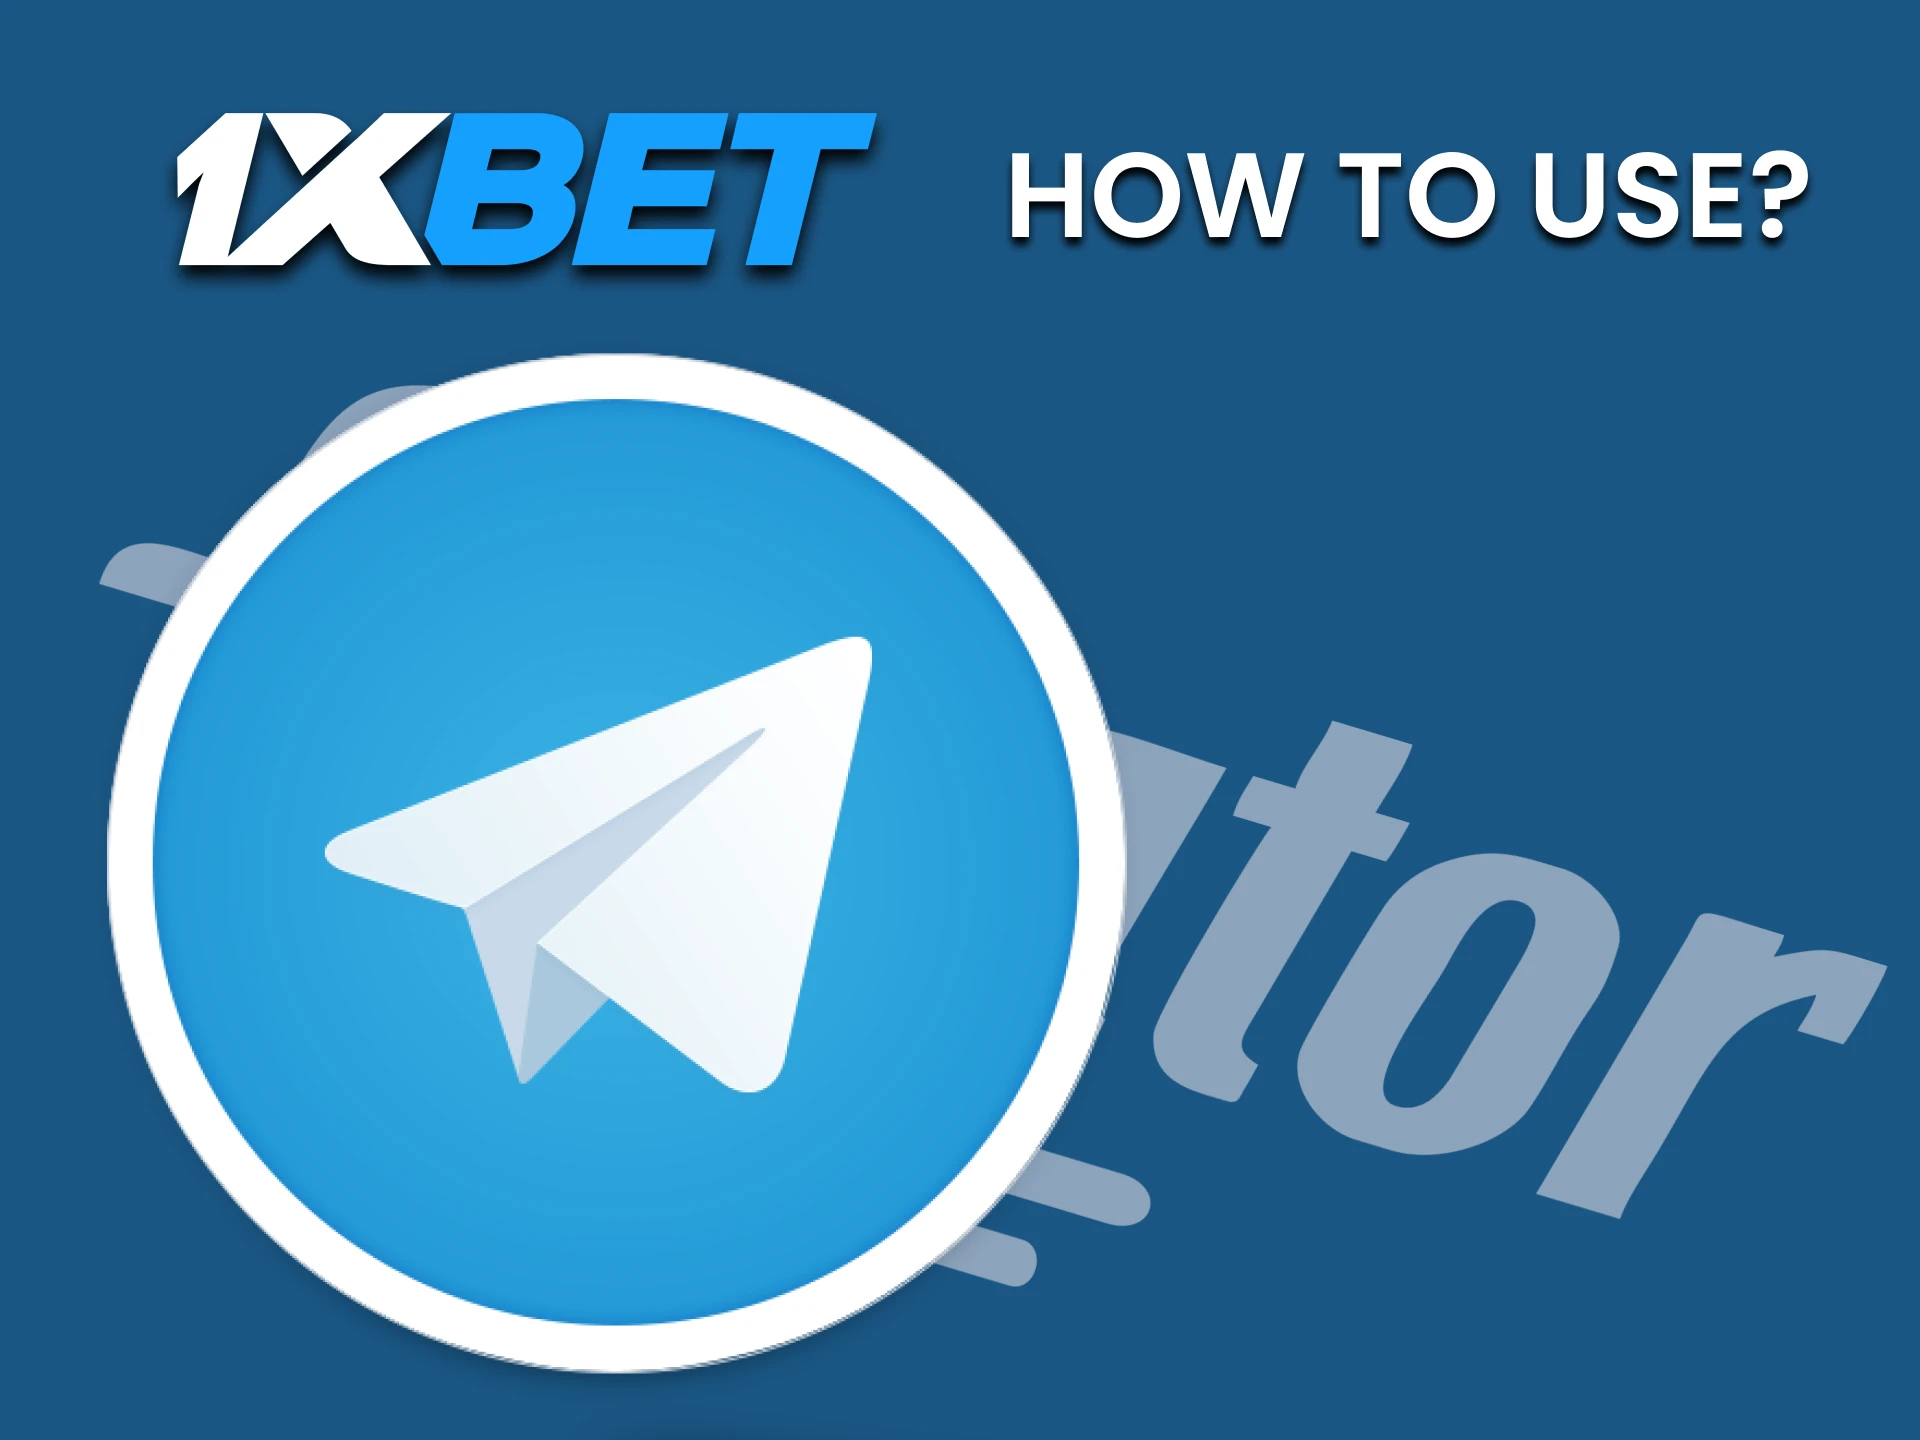 We will tell you how to use signals to play Aviator on 1xbet.